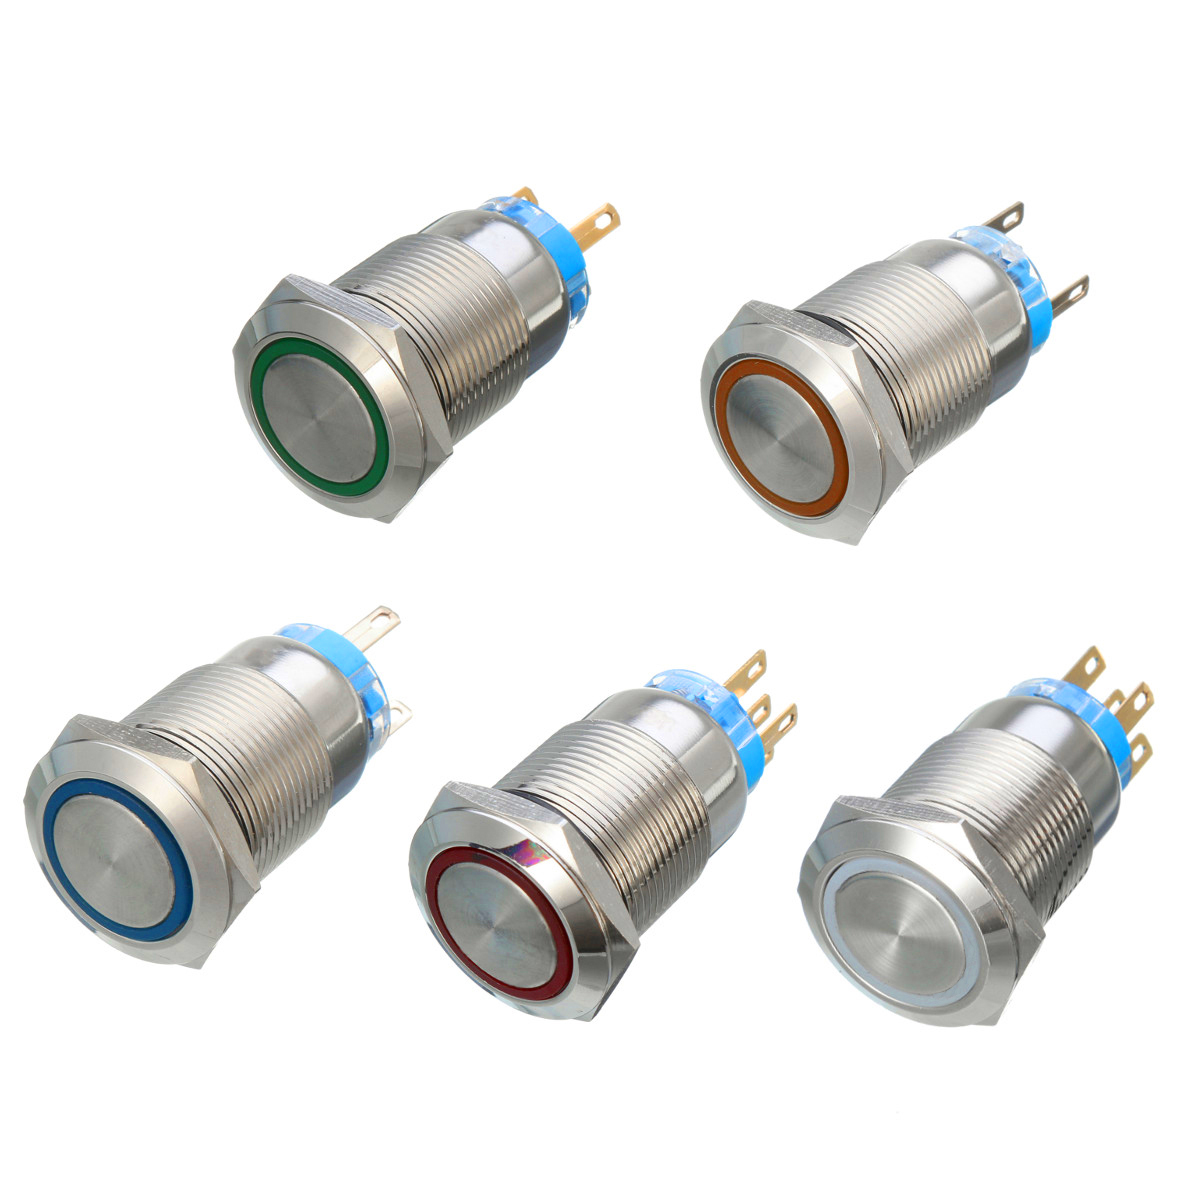 12V-5-Pin-19mm-Led-Light-Stainless-Steel-Push-Button-Momentary-Switch-Sliver-1181527-3